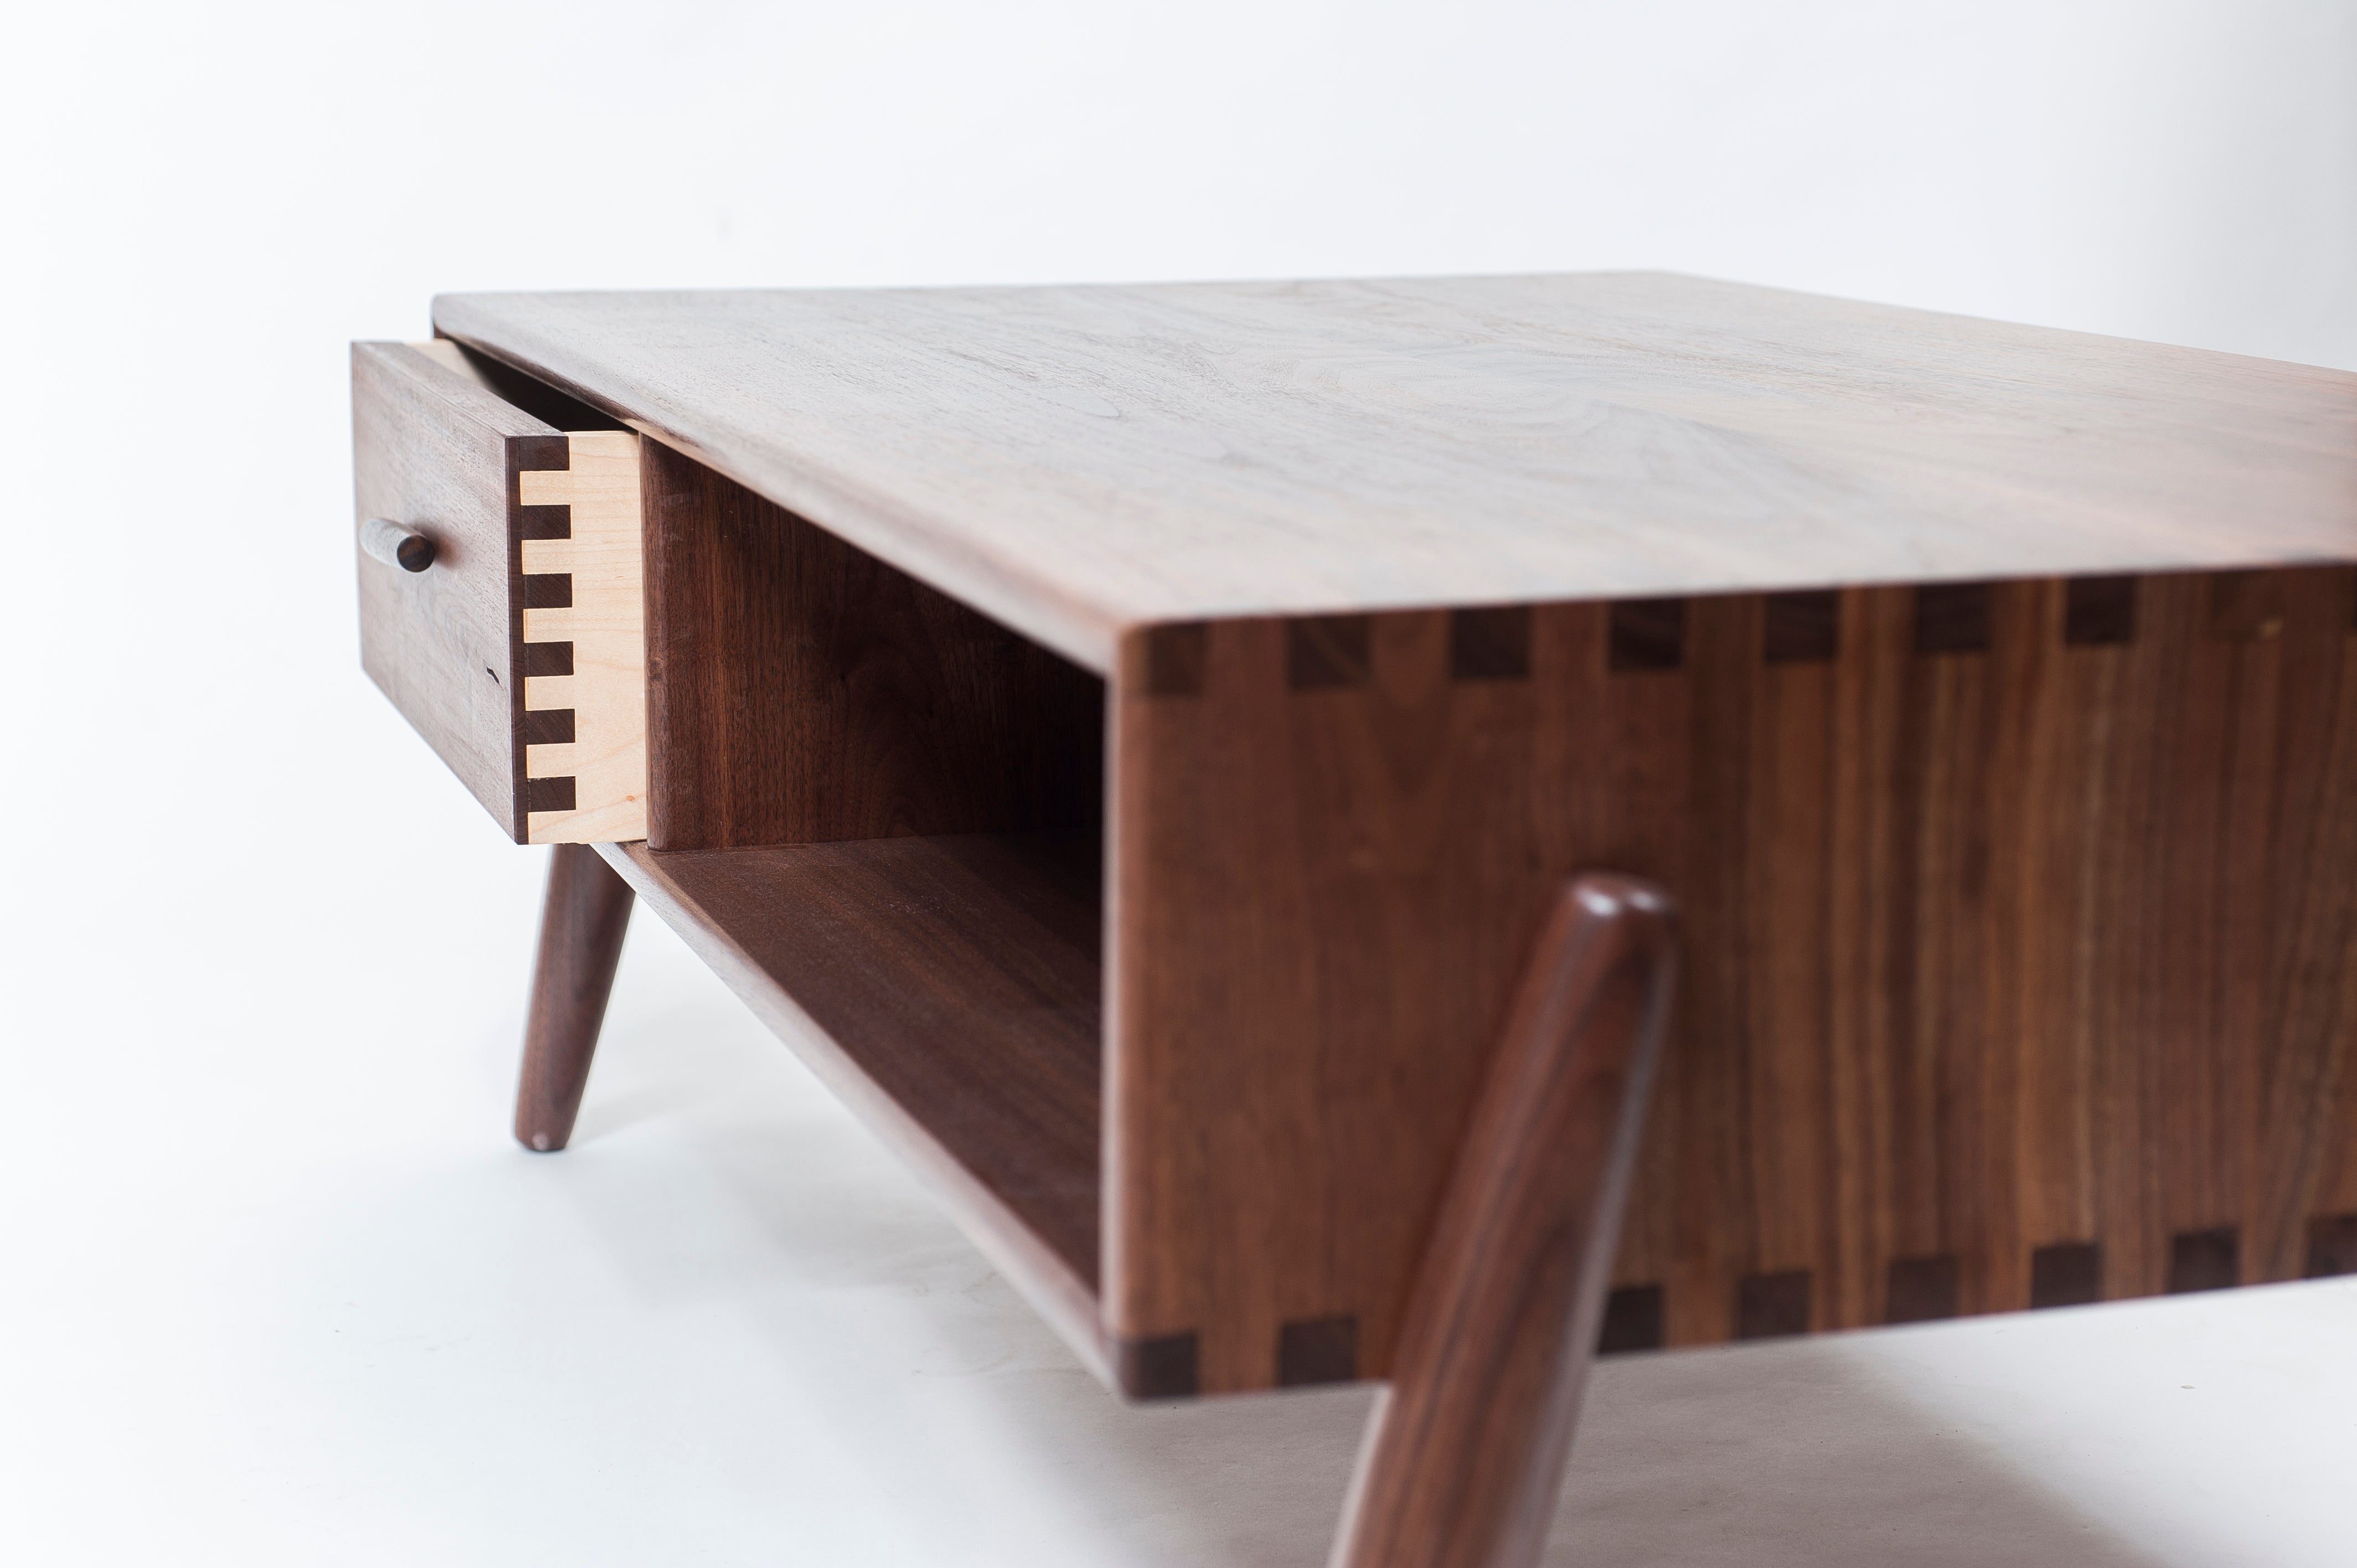 Solomon midcentury modern walnut wood Coffee Table handcrafted by Hunt & Noyer in Michigan